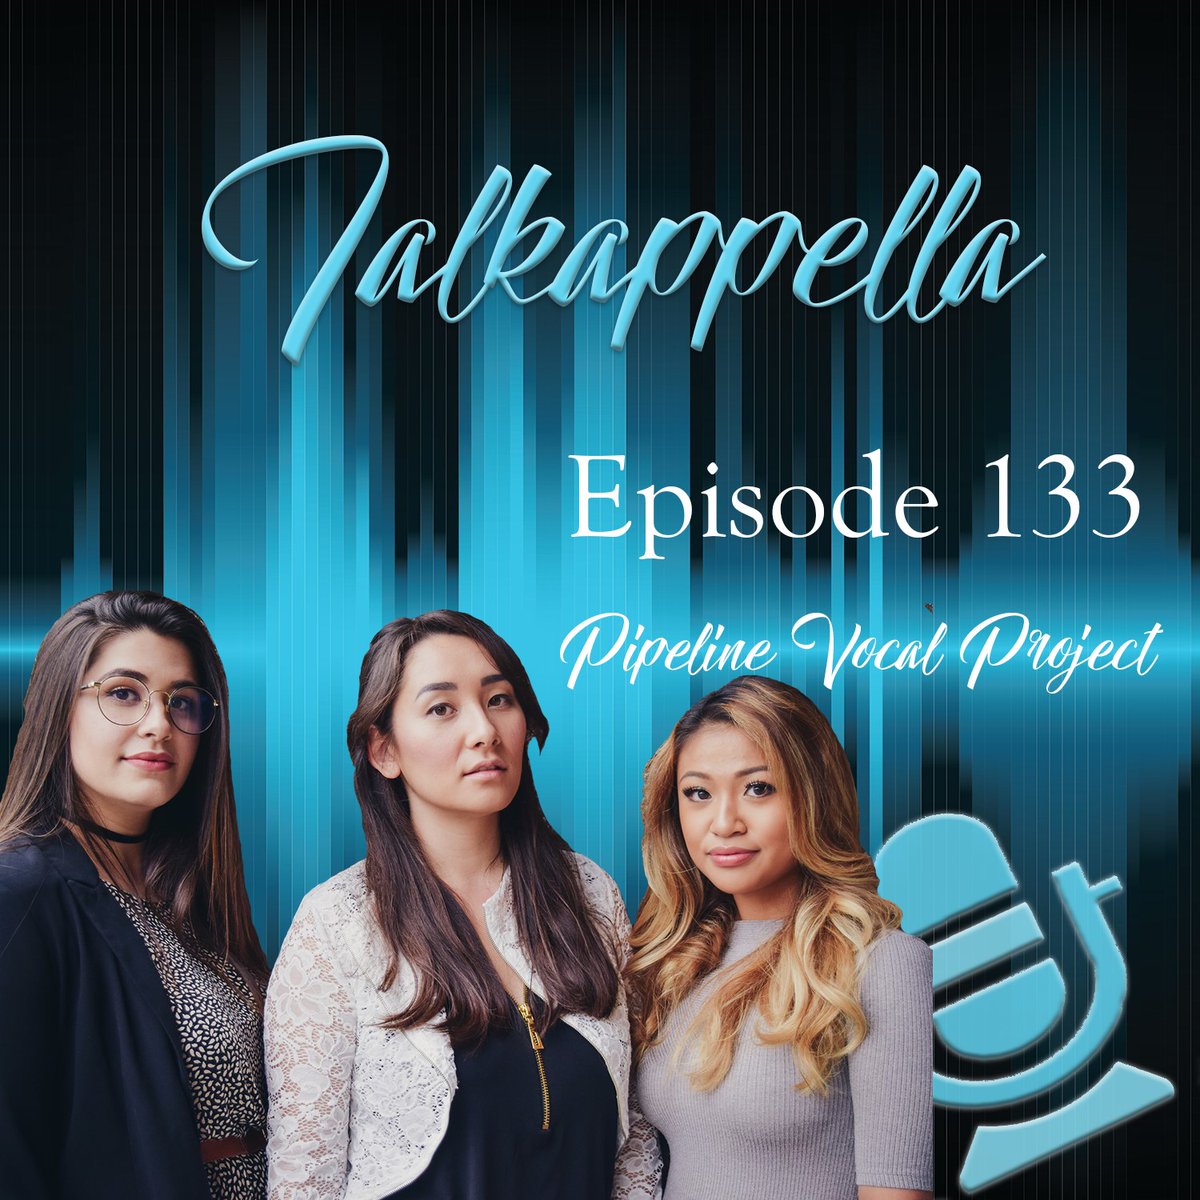 We couldn't wait till 2021 to share a new episode of #Talkappella!

We catch up with the members of @PipelineVoxProj about making it as a vocal band in Alaska and chat about their latest projects. Stream the show on @AcavilleRadio at 8 PM ET. #acappella